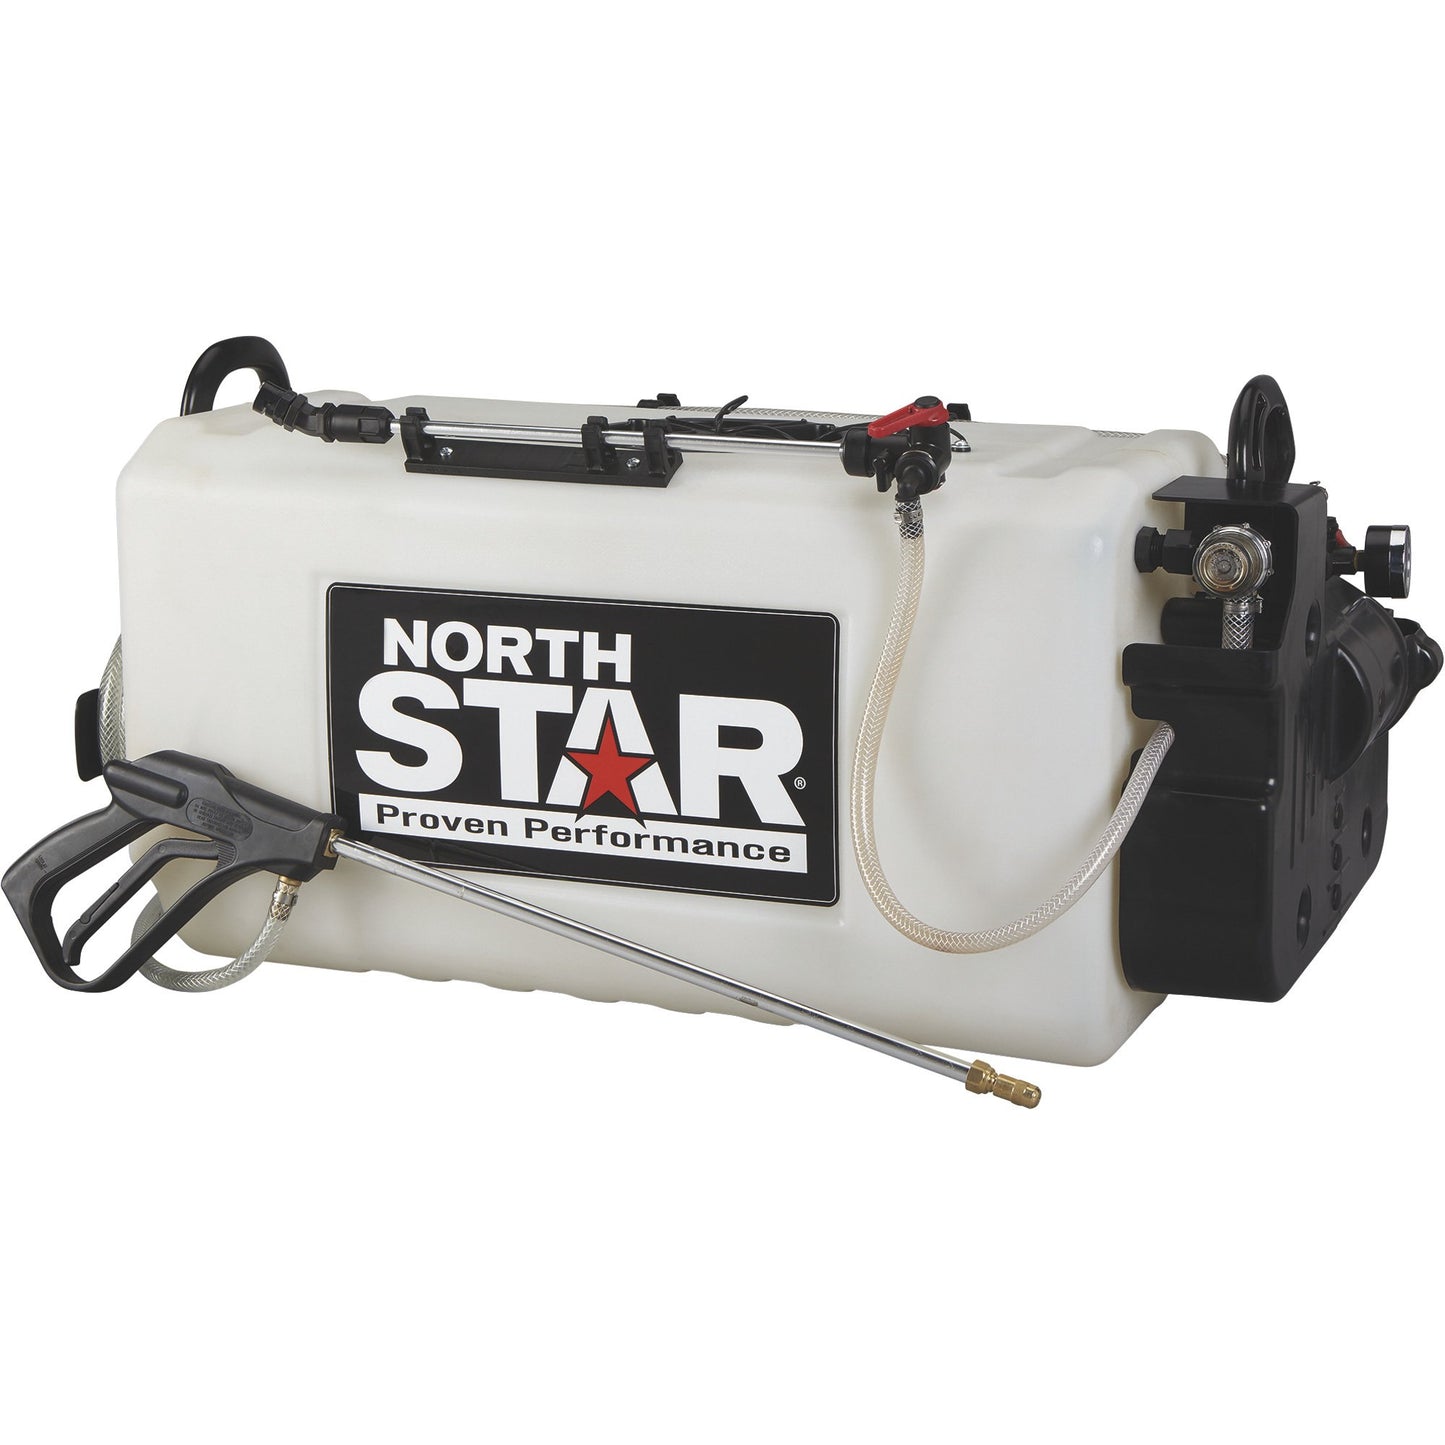 NORTHSTAR 98L Deluxe Boomless Broadcast & Spot Sprayer